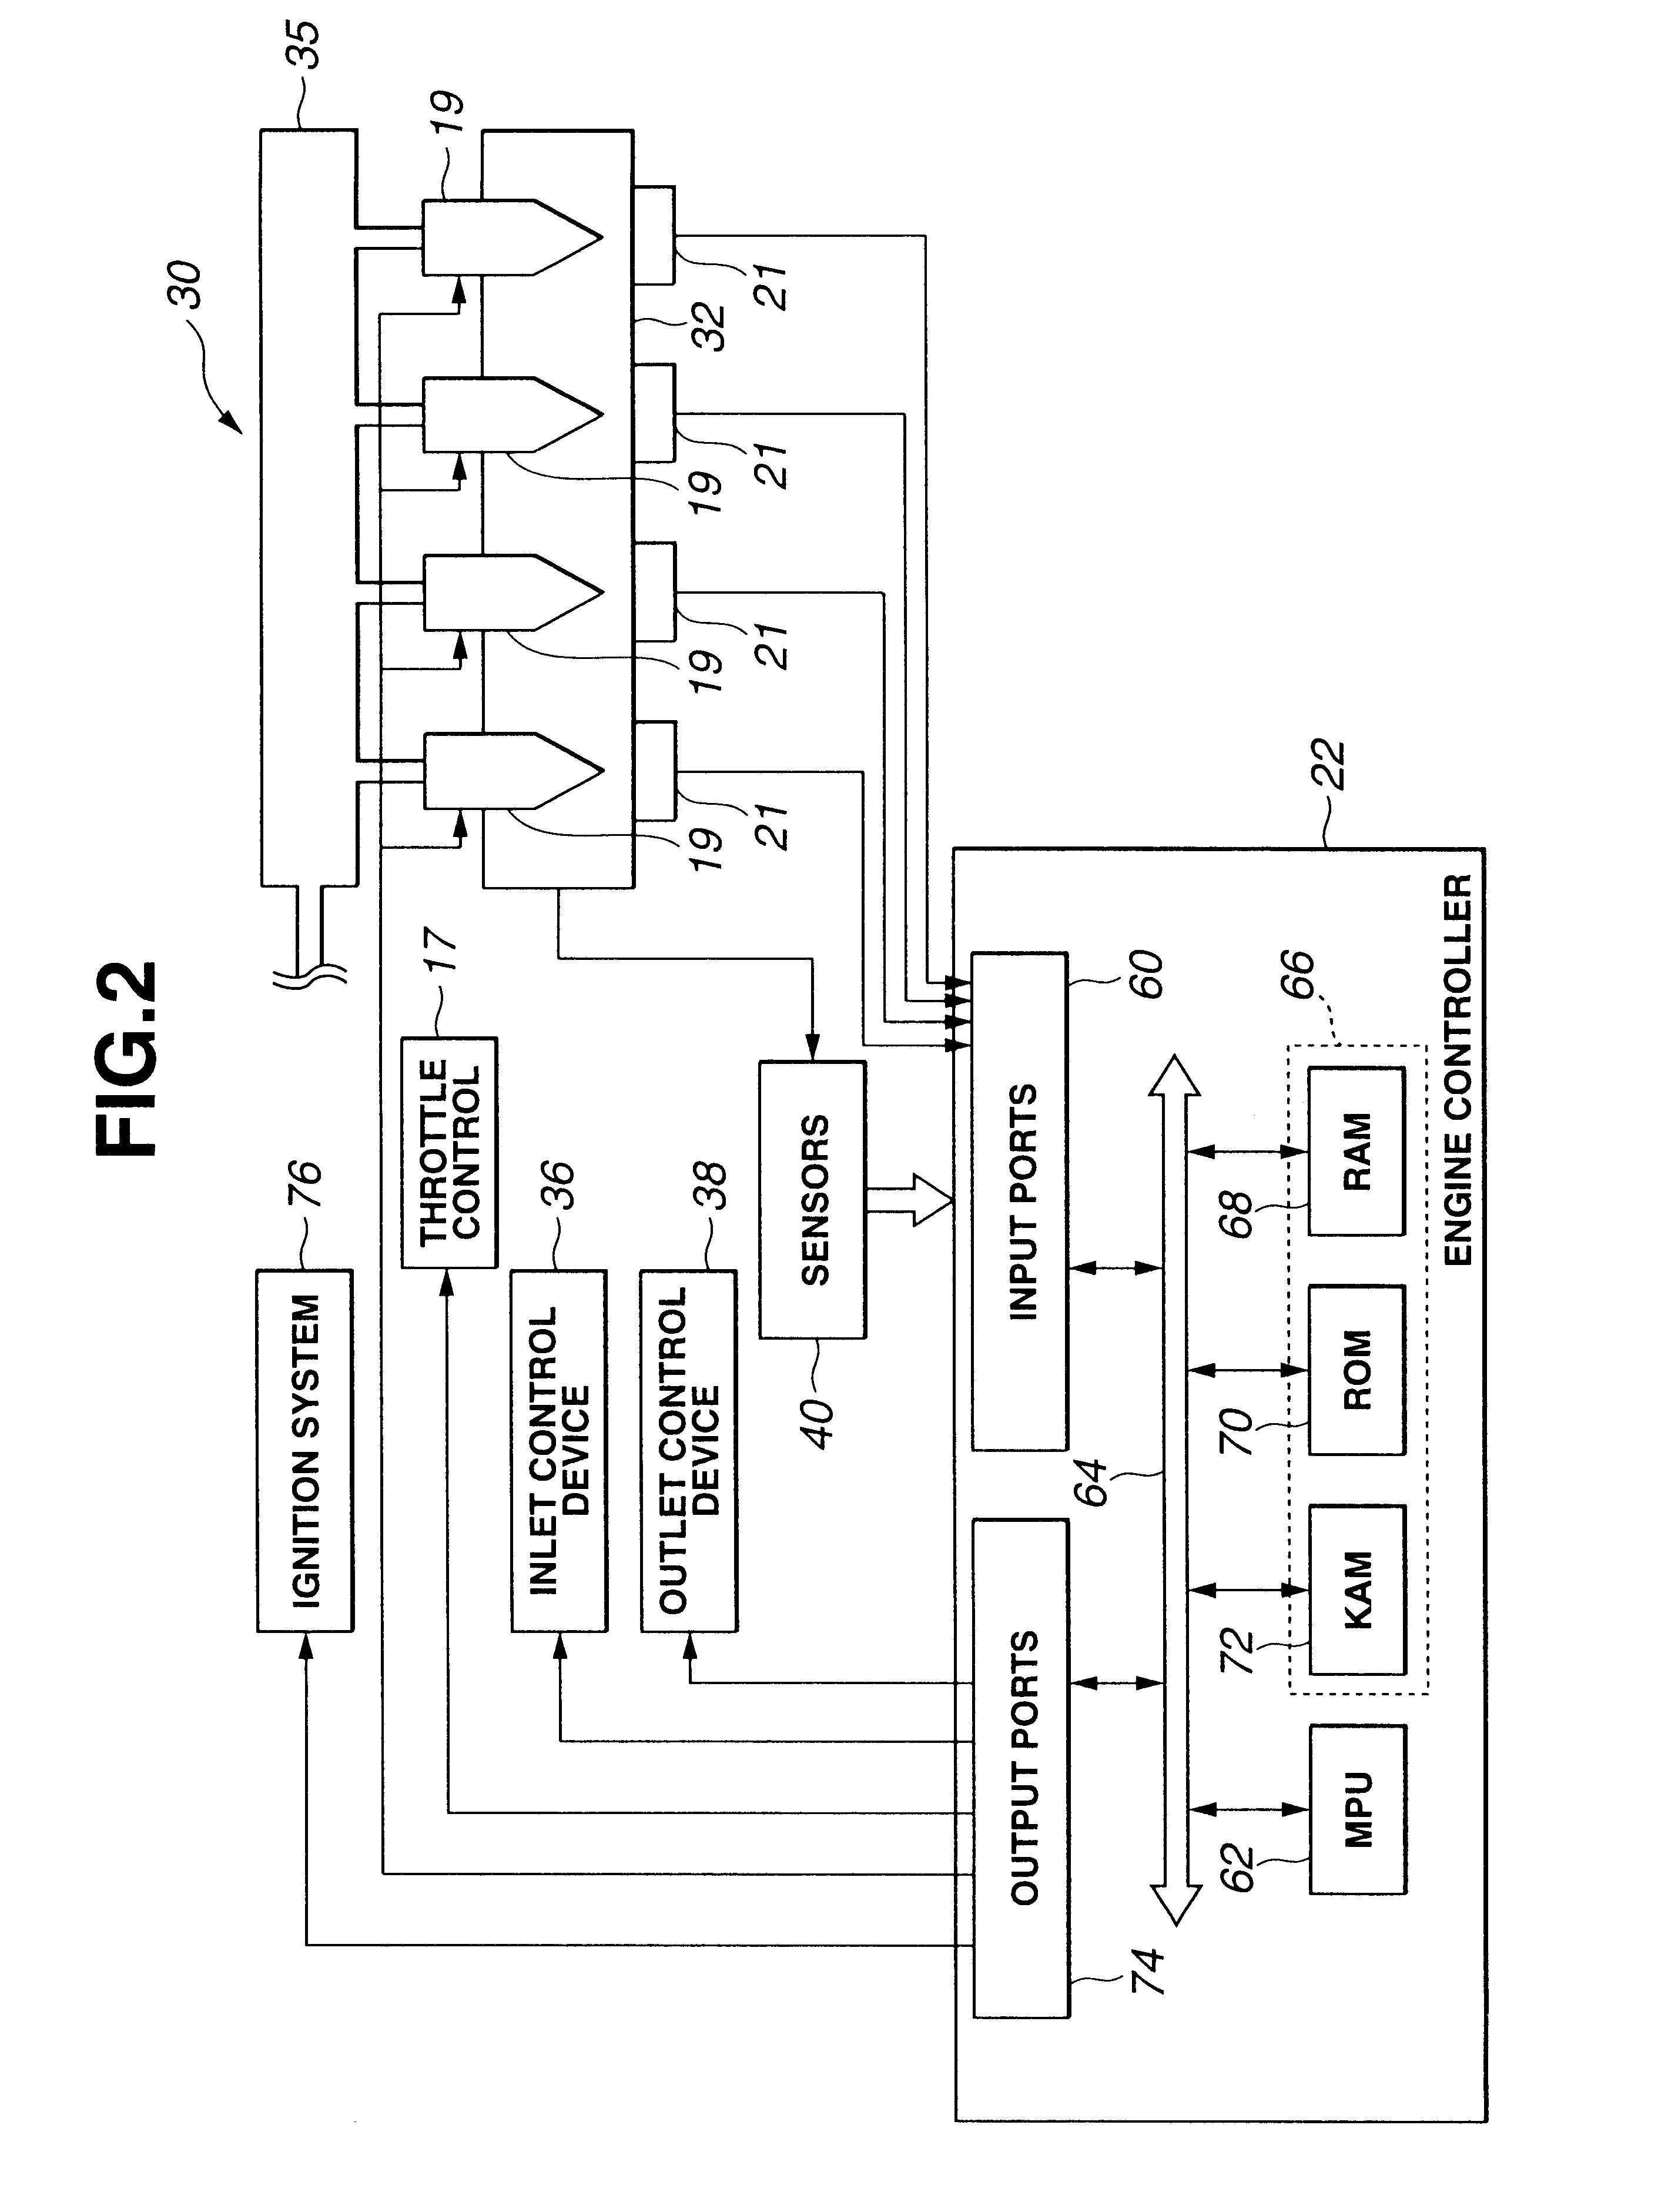 Auto-ignition combustion management in internal combustion engine